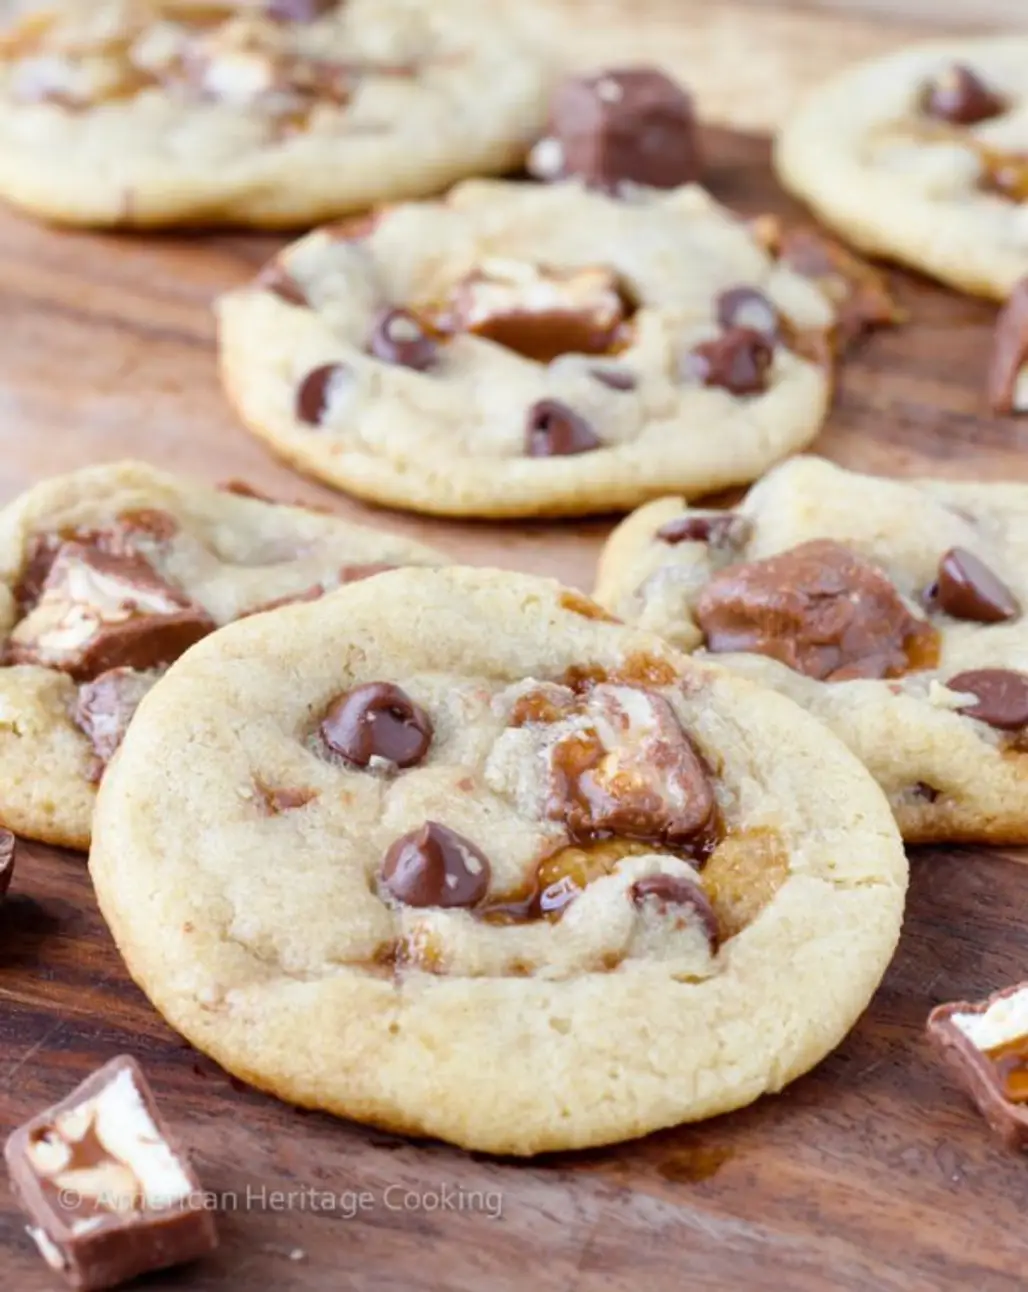 Caramel Stuffed Brown Butter Chocolate Chip Cookies with Snickers